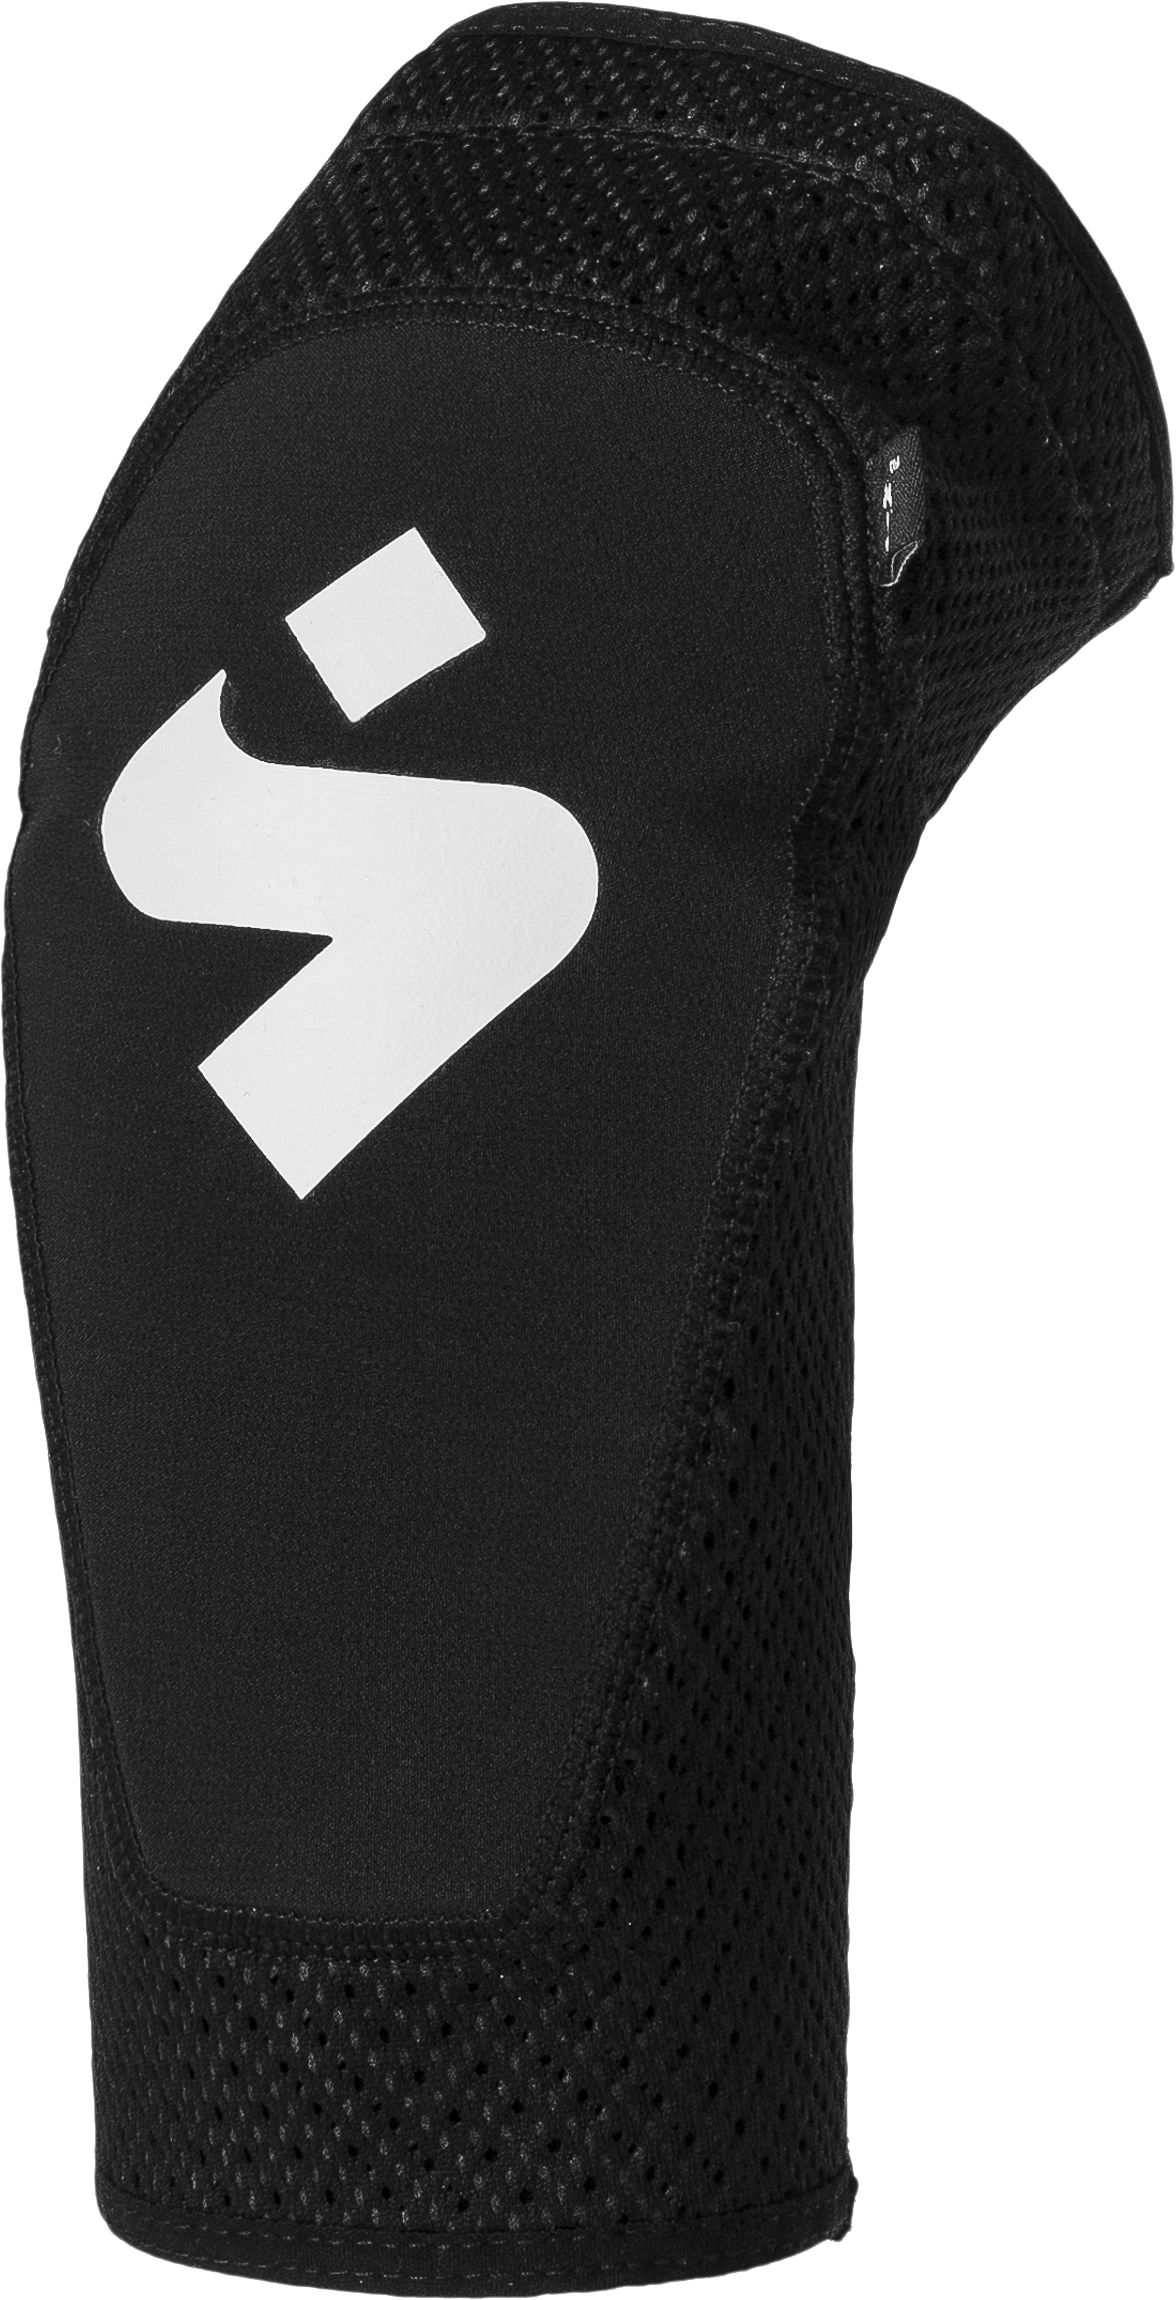 SWEET PROTECTION, Elbow Guards Light